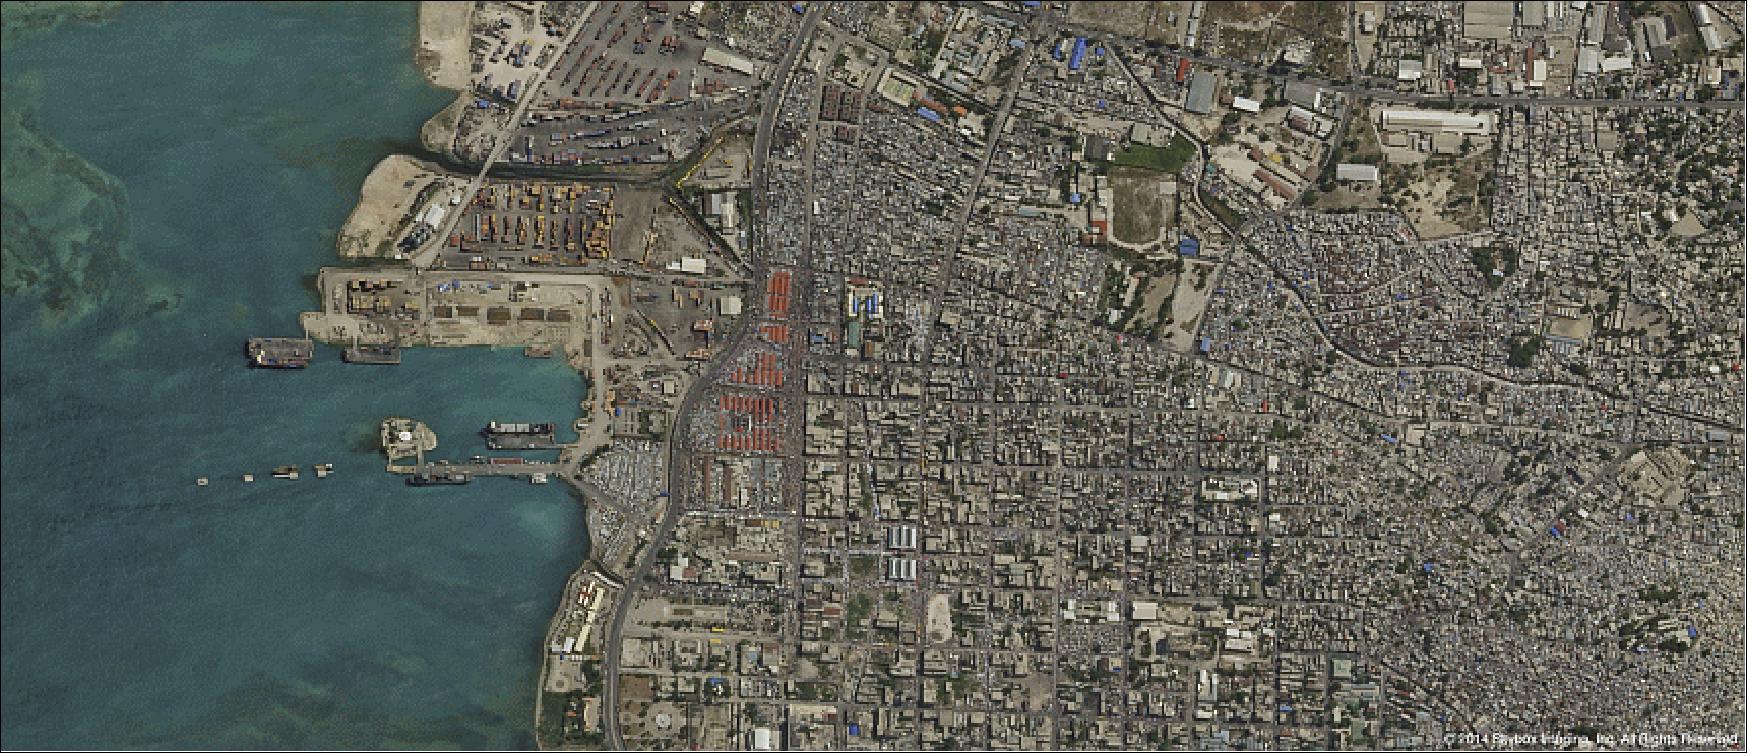 Figure 31: SkySat-2 image of Port-au-Prince, Haiti, acquired on July 10, 2014 within 48 hours after launch (image credit: Skybox Imaging) 65)